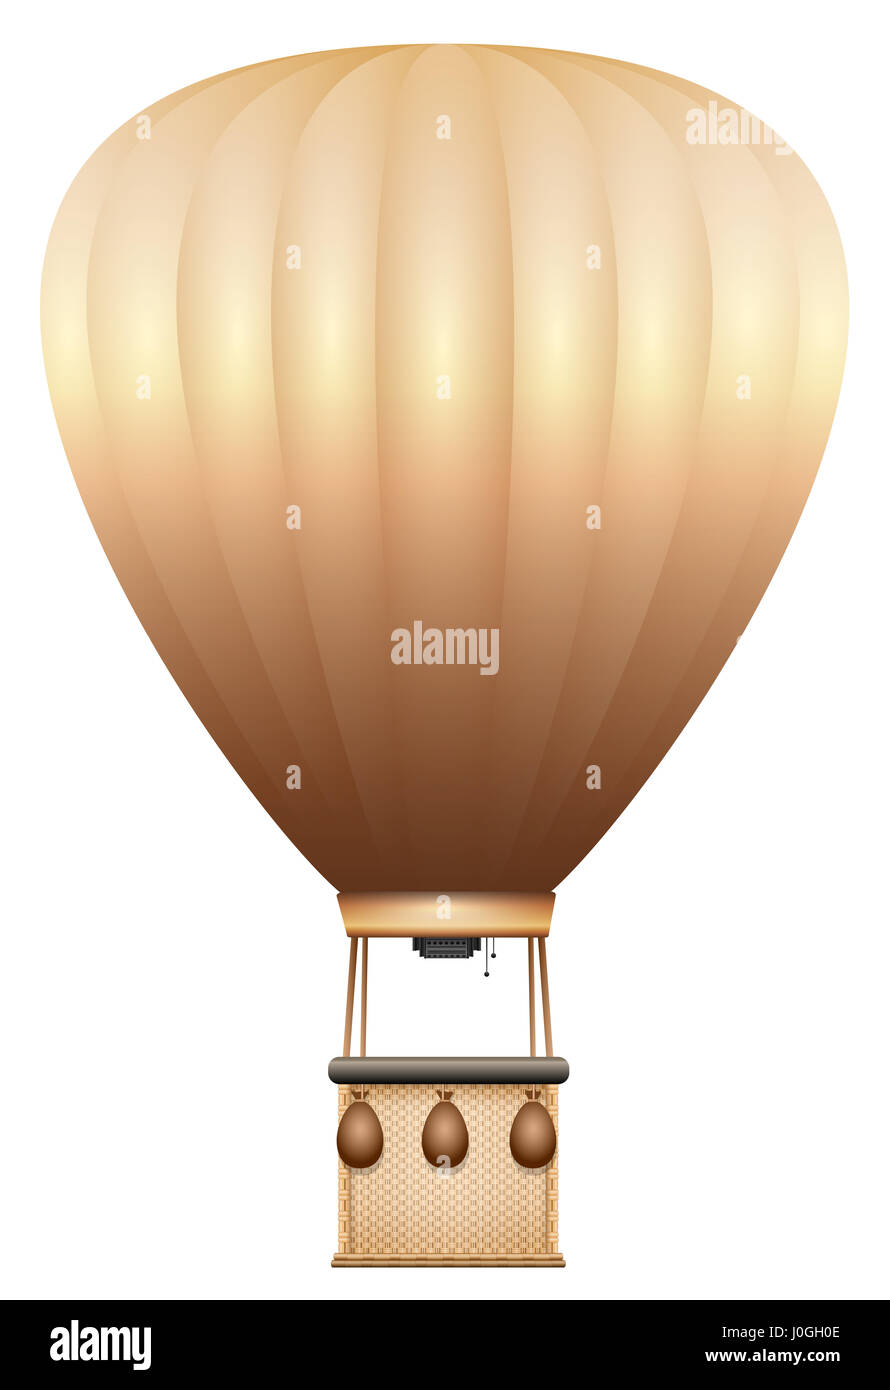 Hot air ballon - old fashioned retro style with braiding pattern basket and vintage sandbags - isolated illustration on white background. Stock Photo